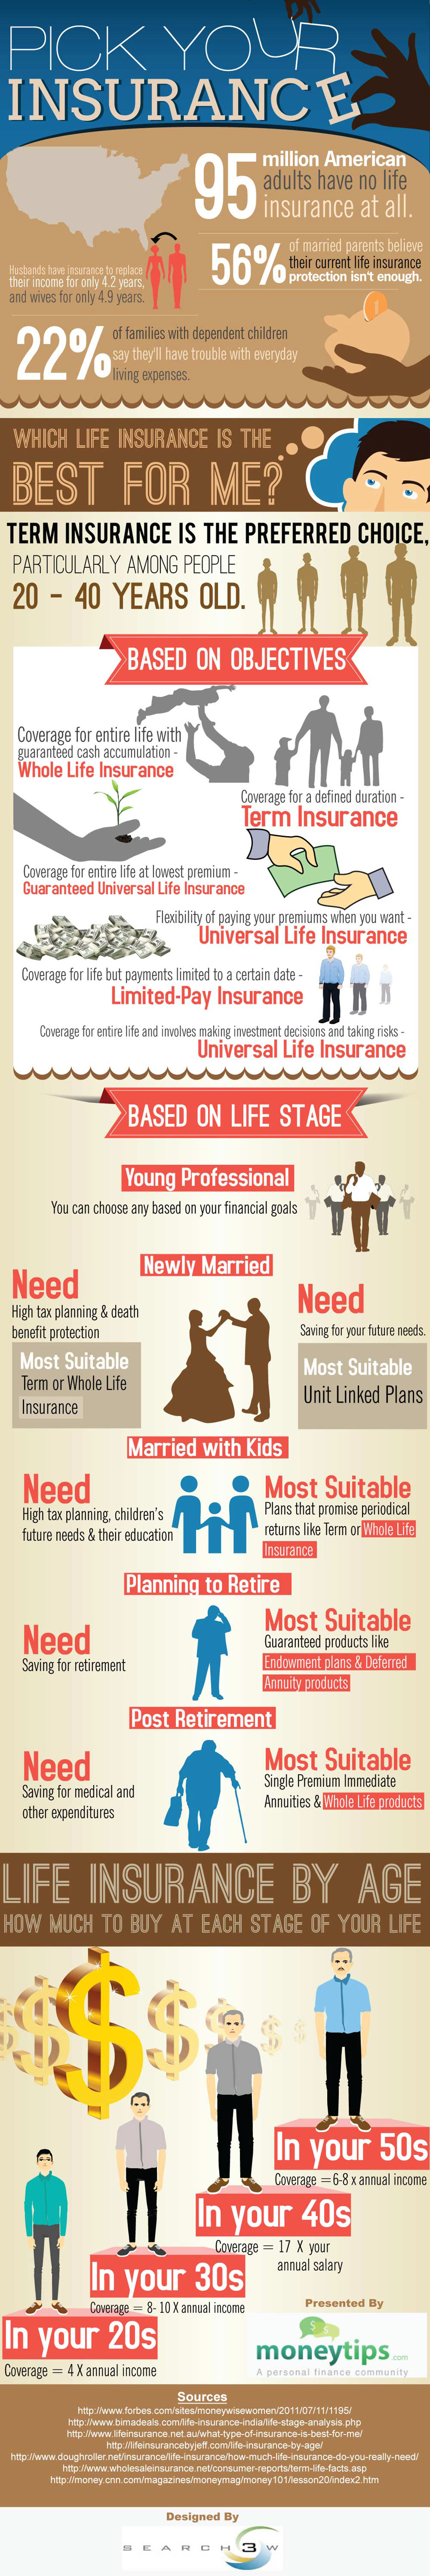 Which Life Insurance is the Best for Me? Infographic